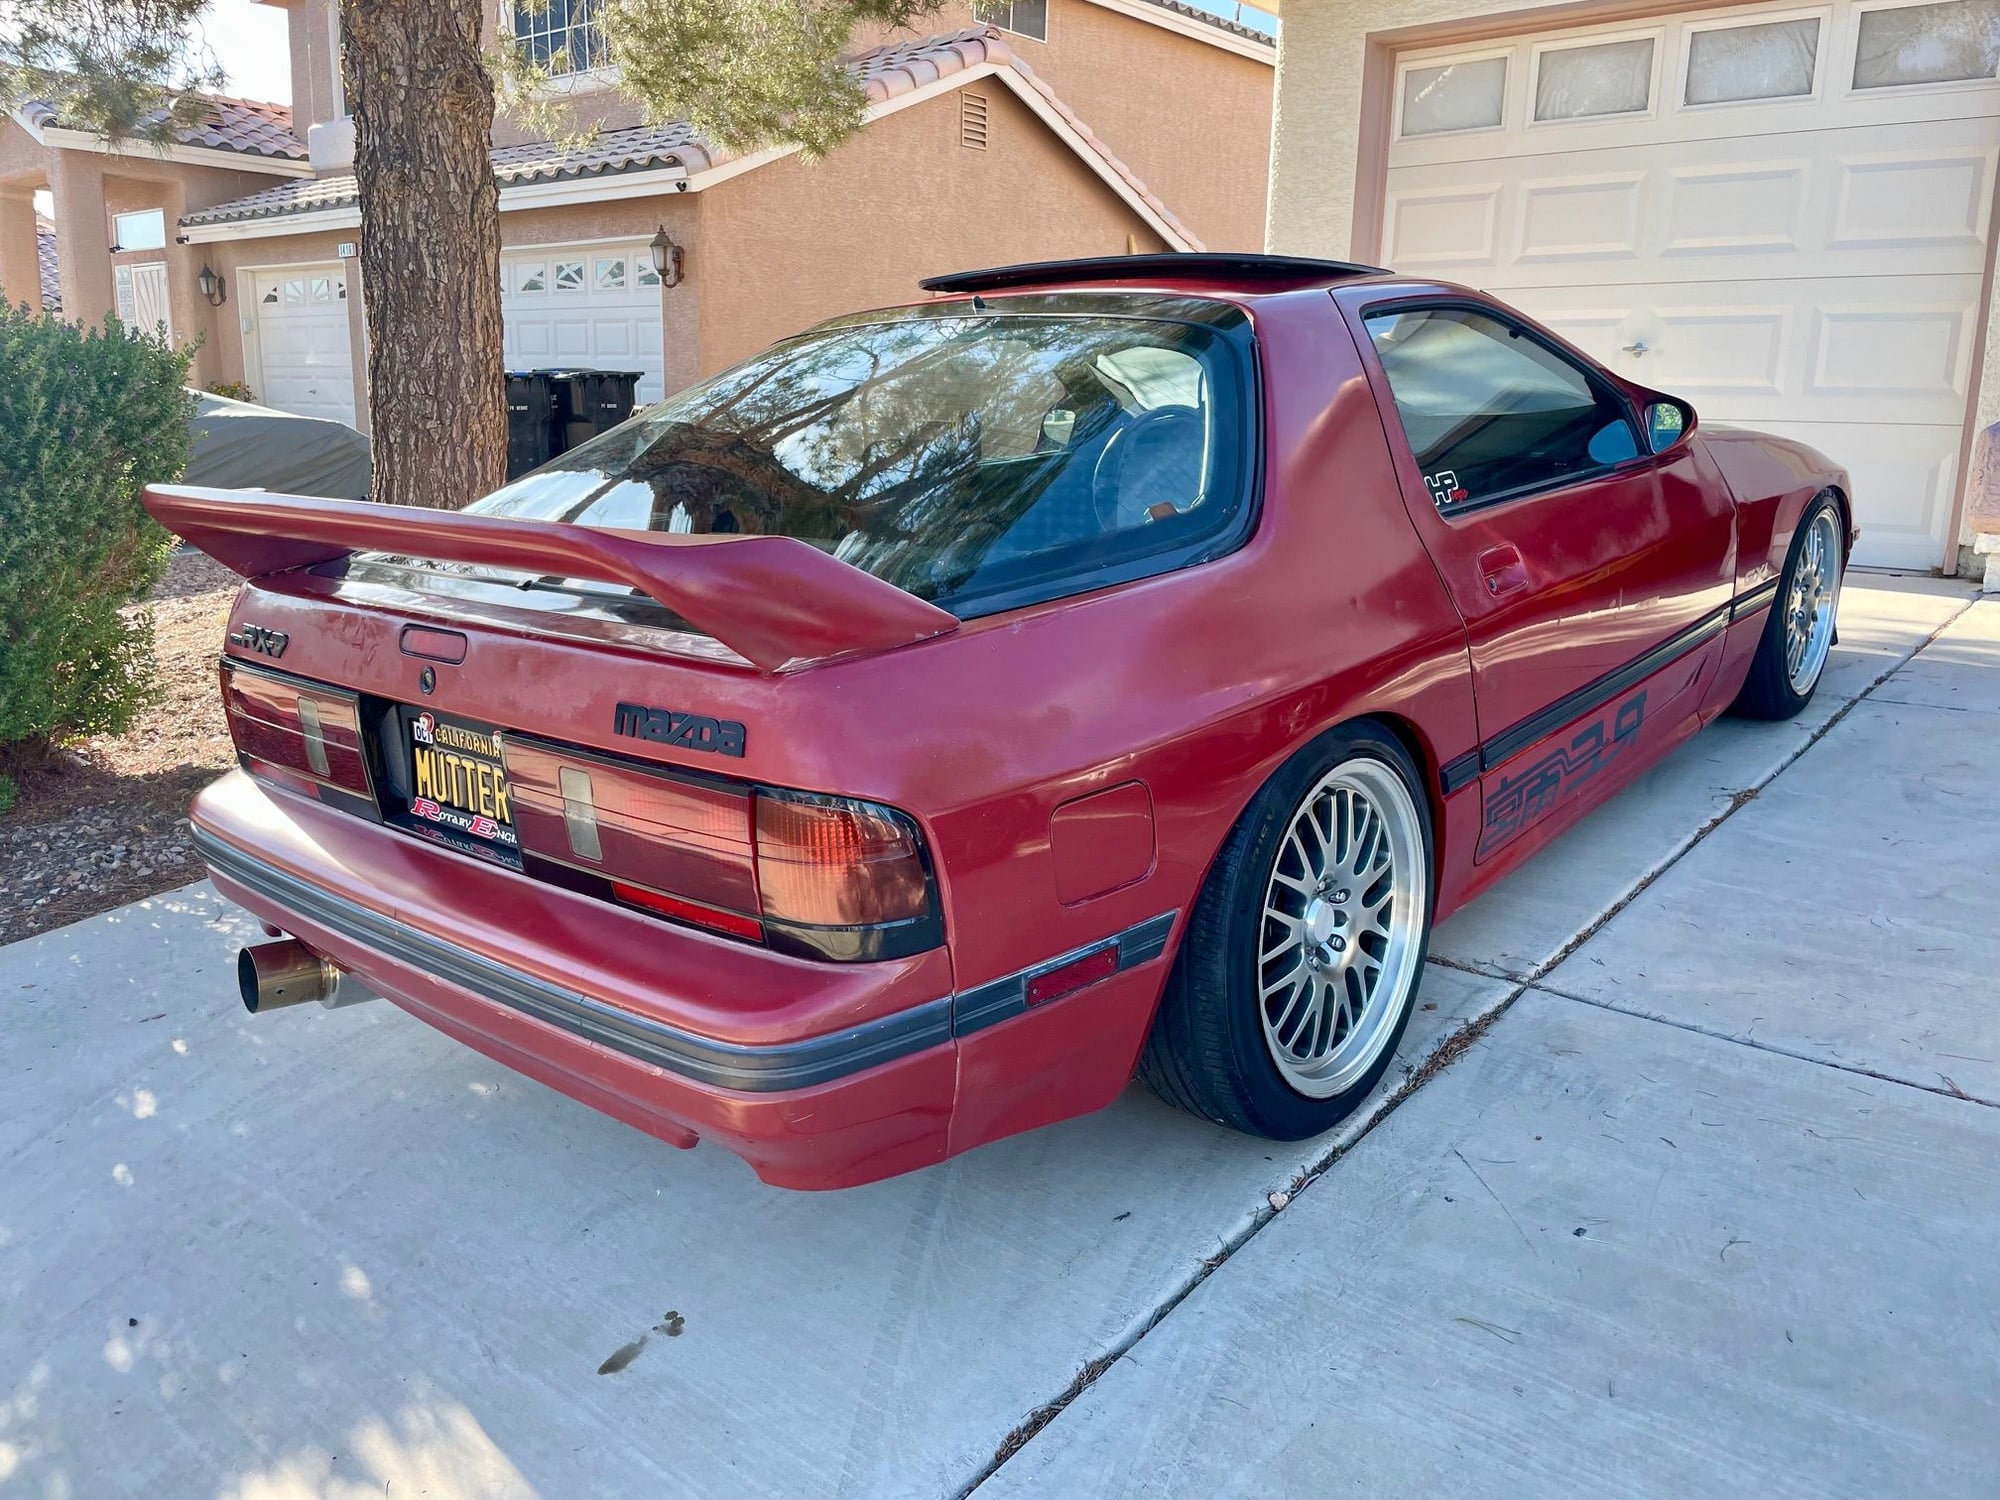 1986 Mazda RX-7 - Selling my s4 GXL TII swapped FC - Used - VIN JM1FC3317G0158563 - 169,596 Miles - Manual - Coupe - Red - Henderson, NV 89002, United States